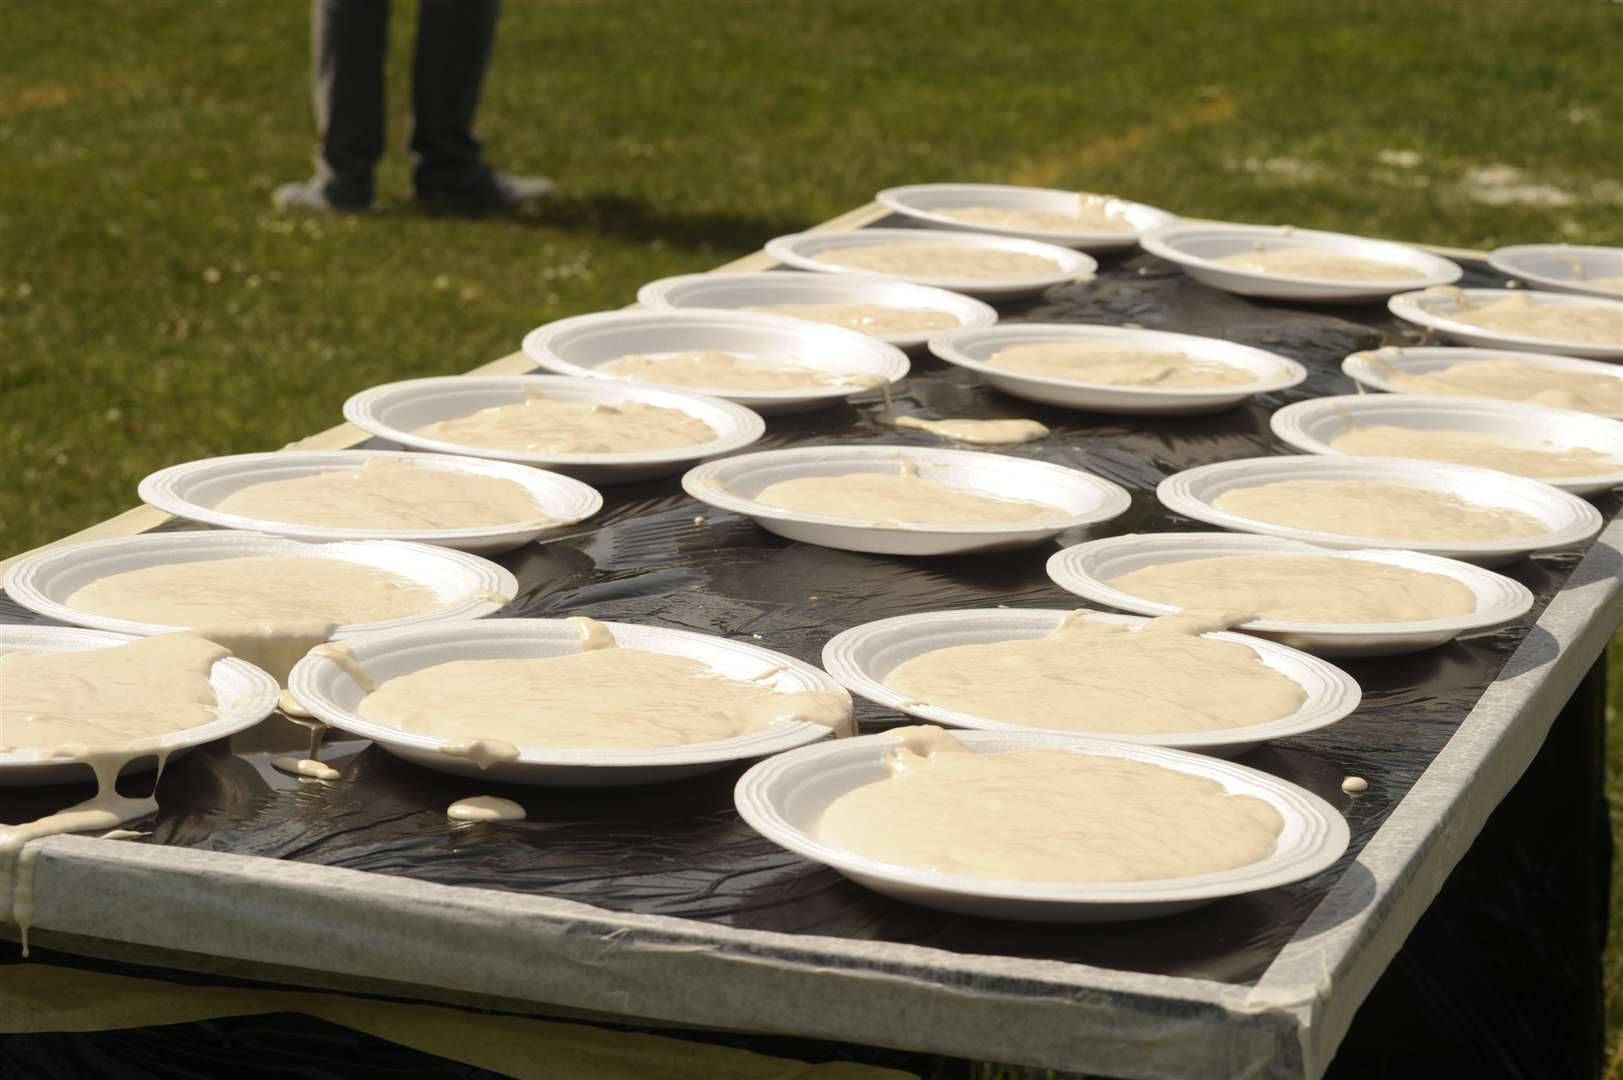 About 1500 pies are used every year! Picture: Steve Crispe